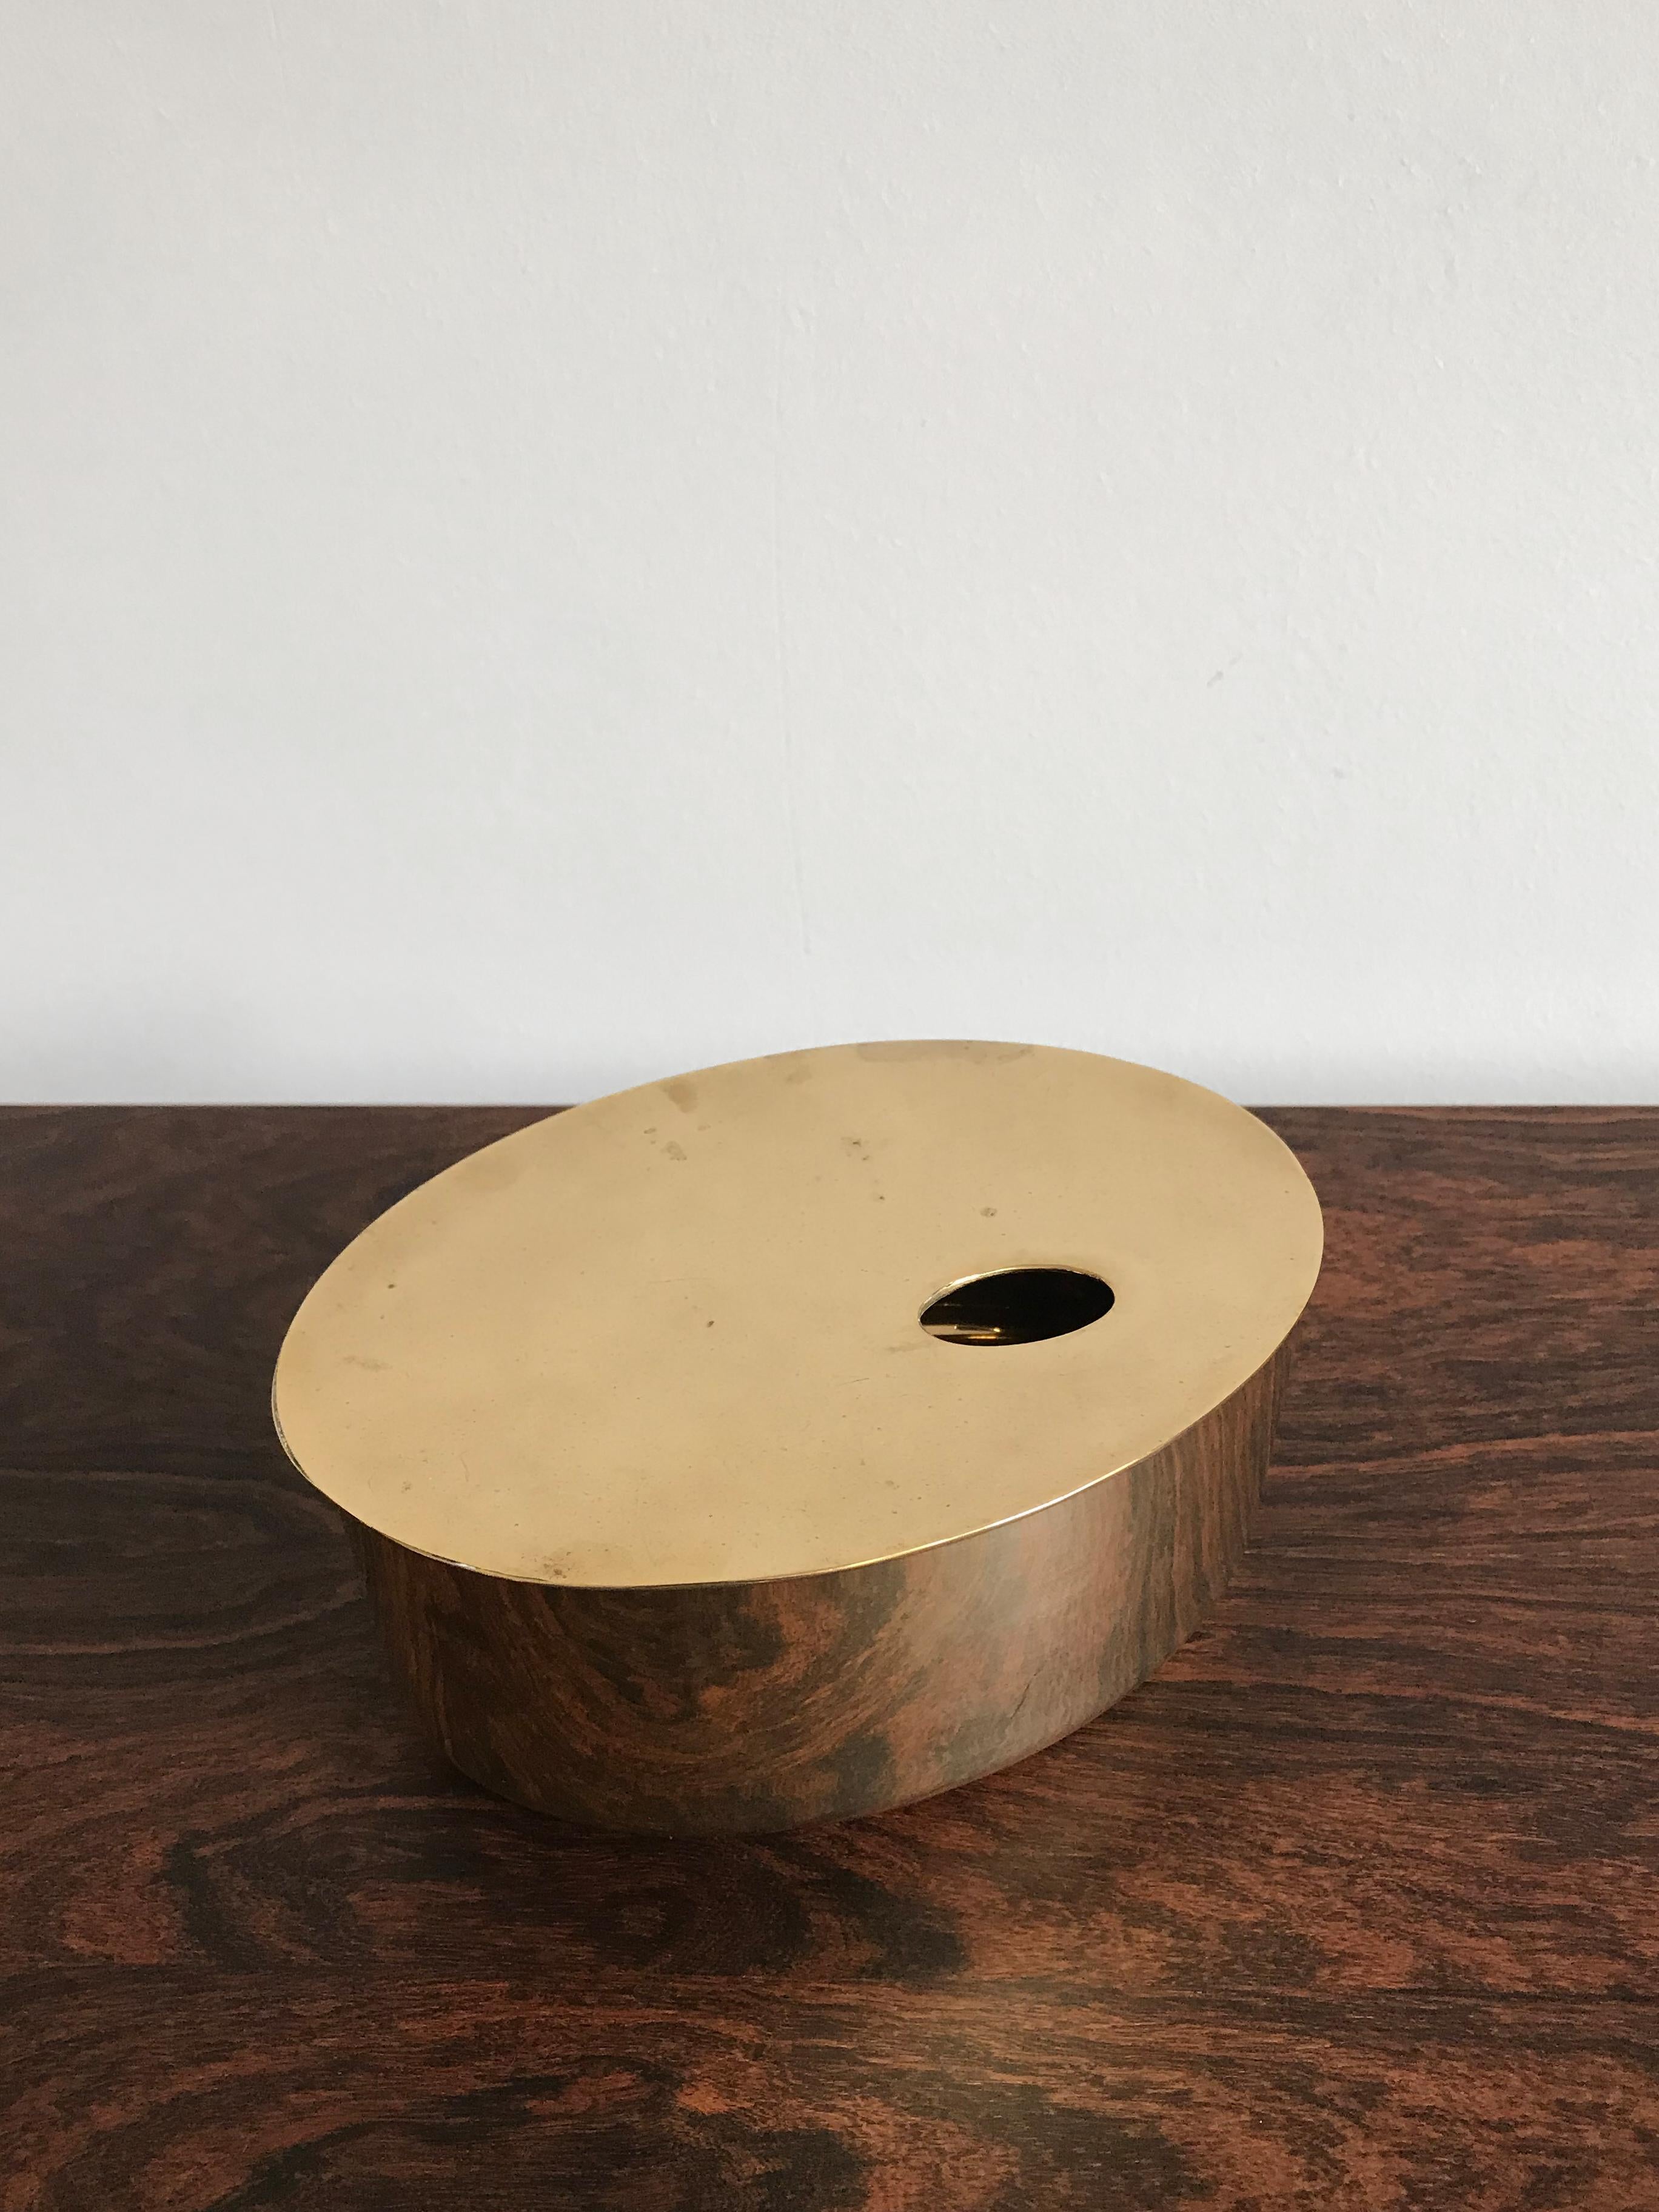 Scandinavian box or jewelry box in solid brass design by Georg Jensen Denmark with Signature engraved under the base, 2000s

Please note that the item is original of the period and this shows normal signs of age and use.